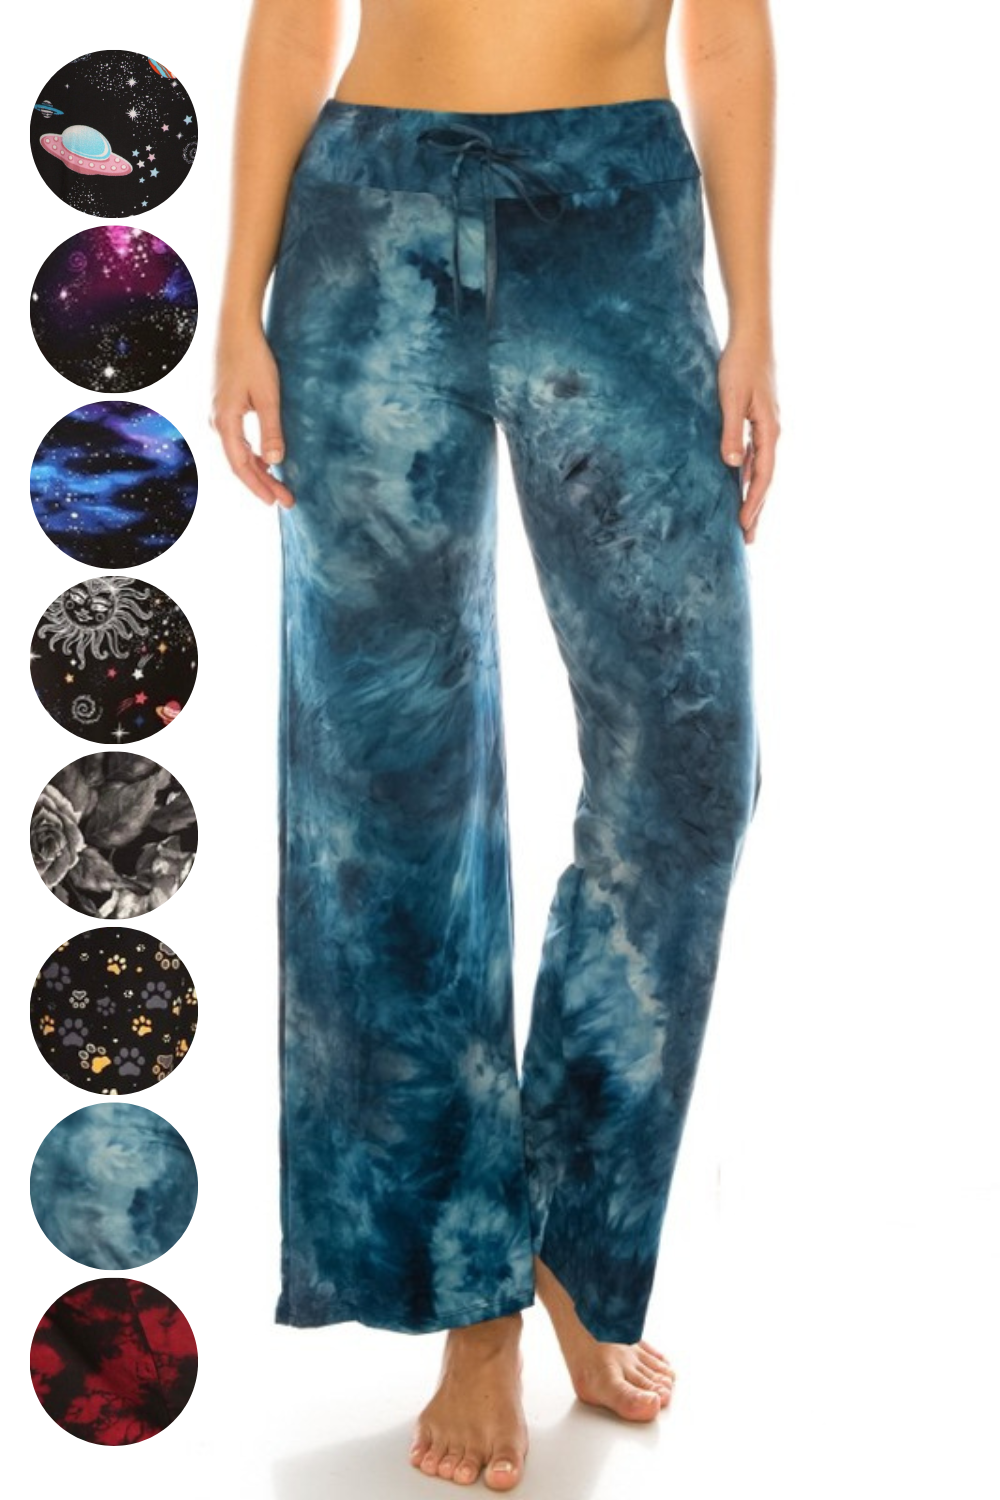 Staycation Lounge Pants | Features:  Soft brushed legging material Stretchy fabric Wide Yoga Style Waistband Drawstring tie waist Straight Leg True to Size | 8 fun prints: Galaxy Pink, Galaxy Camo, Outer Space, Sun & Moon, Black & Grey Floral, Paw Print, Arctic Blue Tie Dye, and Burgundy Wine Tie Dye   